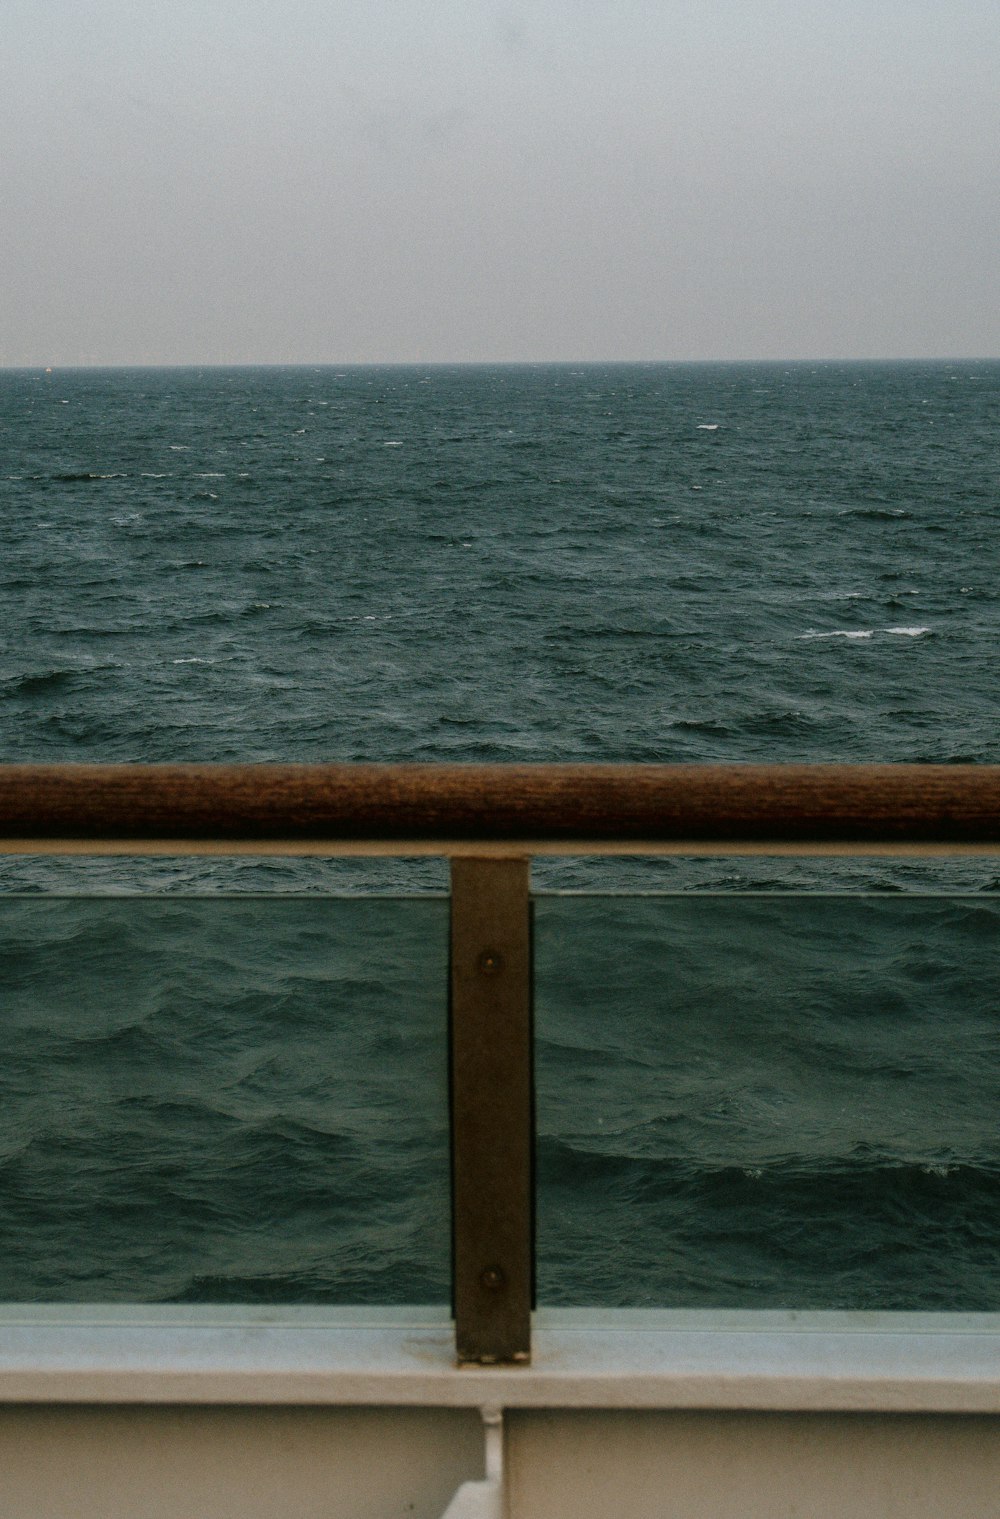 a view of a body of water from a ship